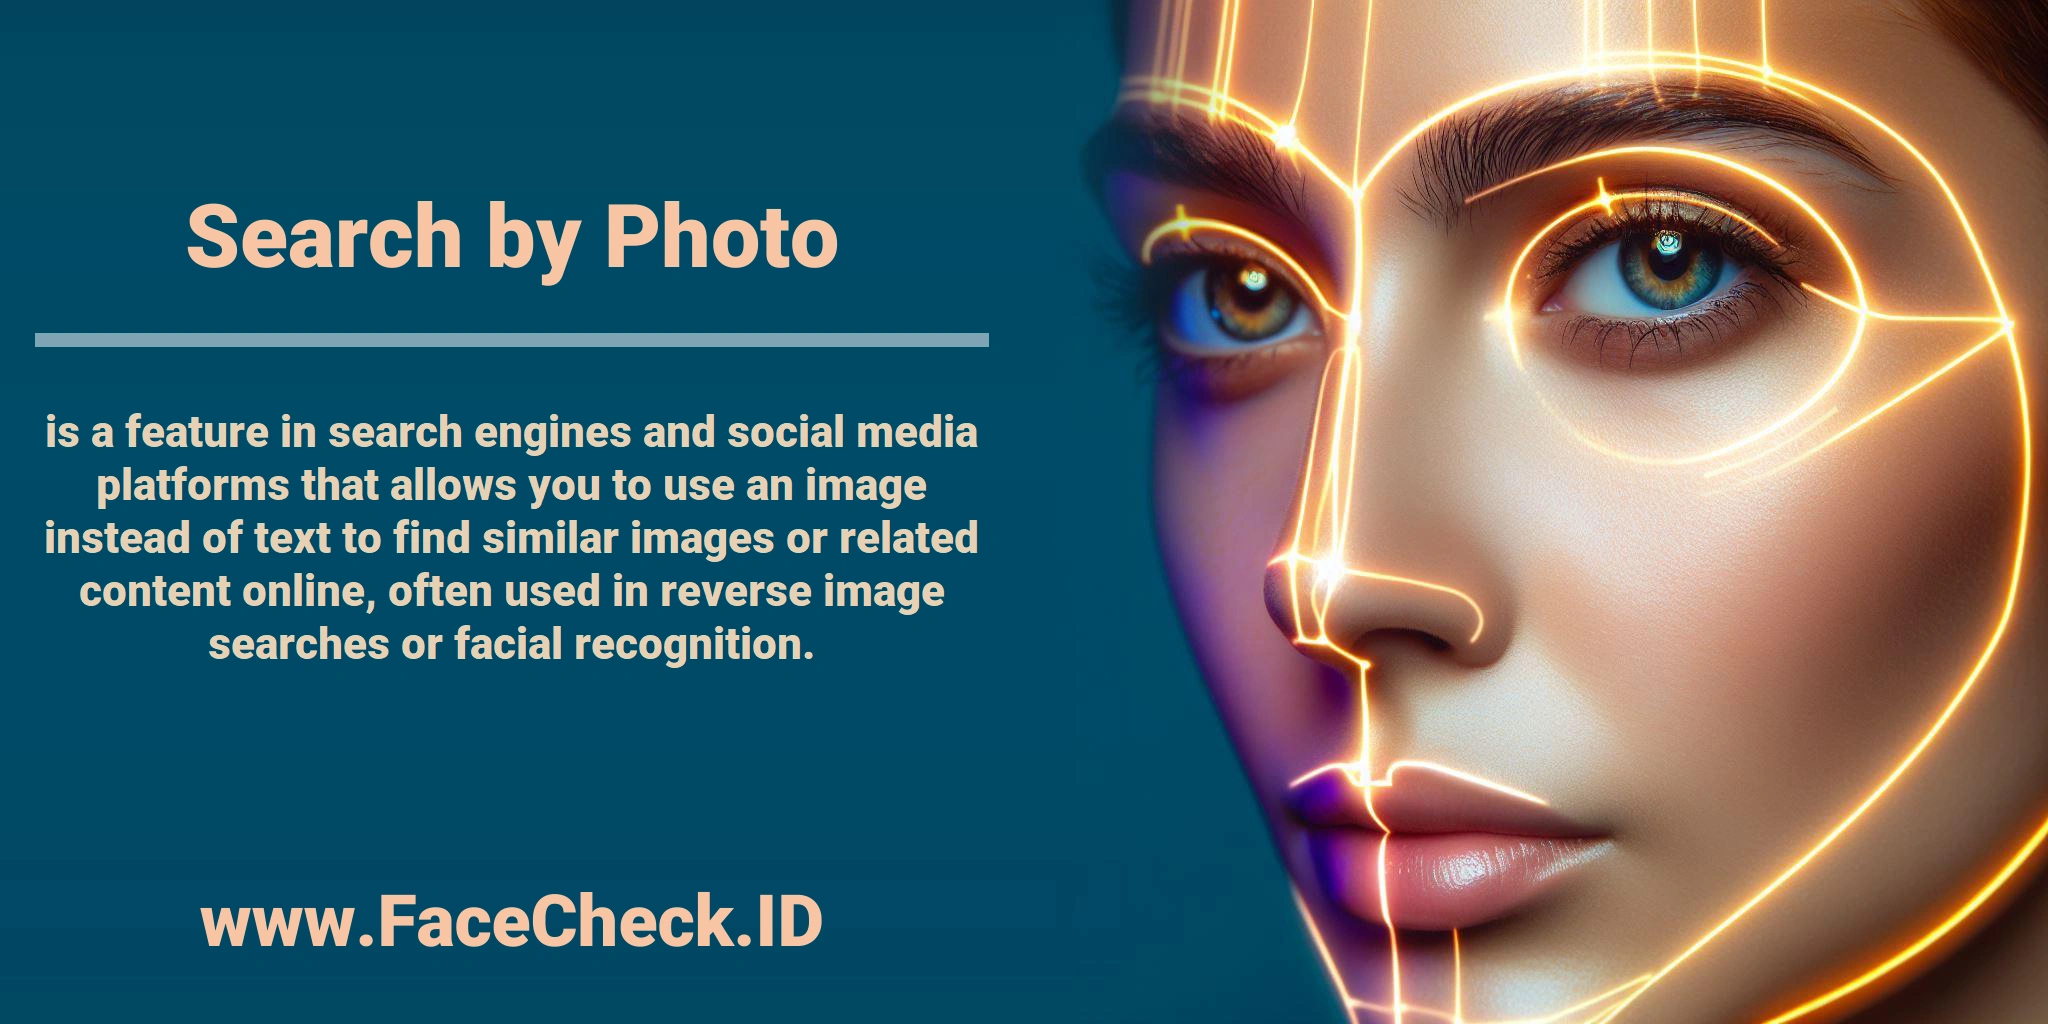 <b>Search by Photo</b> is a feature in search engines and social media platforms that allows you to use an image instead of text to find similar images or related content online, often used in reverse image searches or facial recognition.